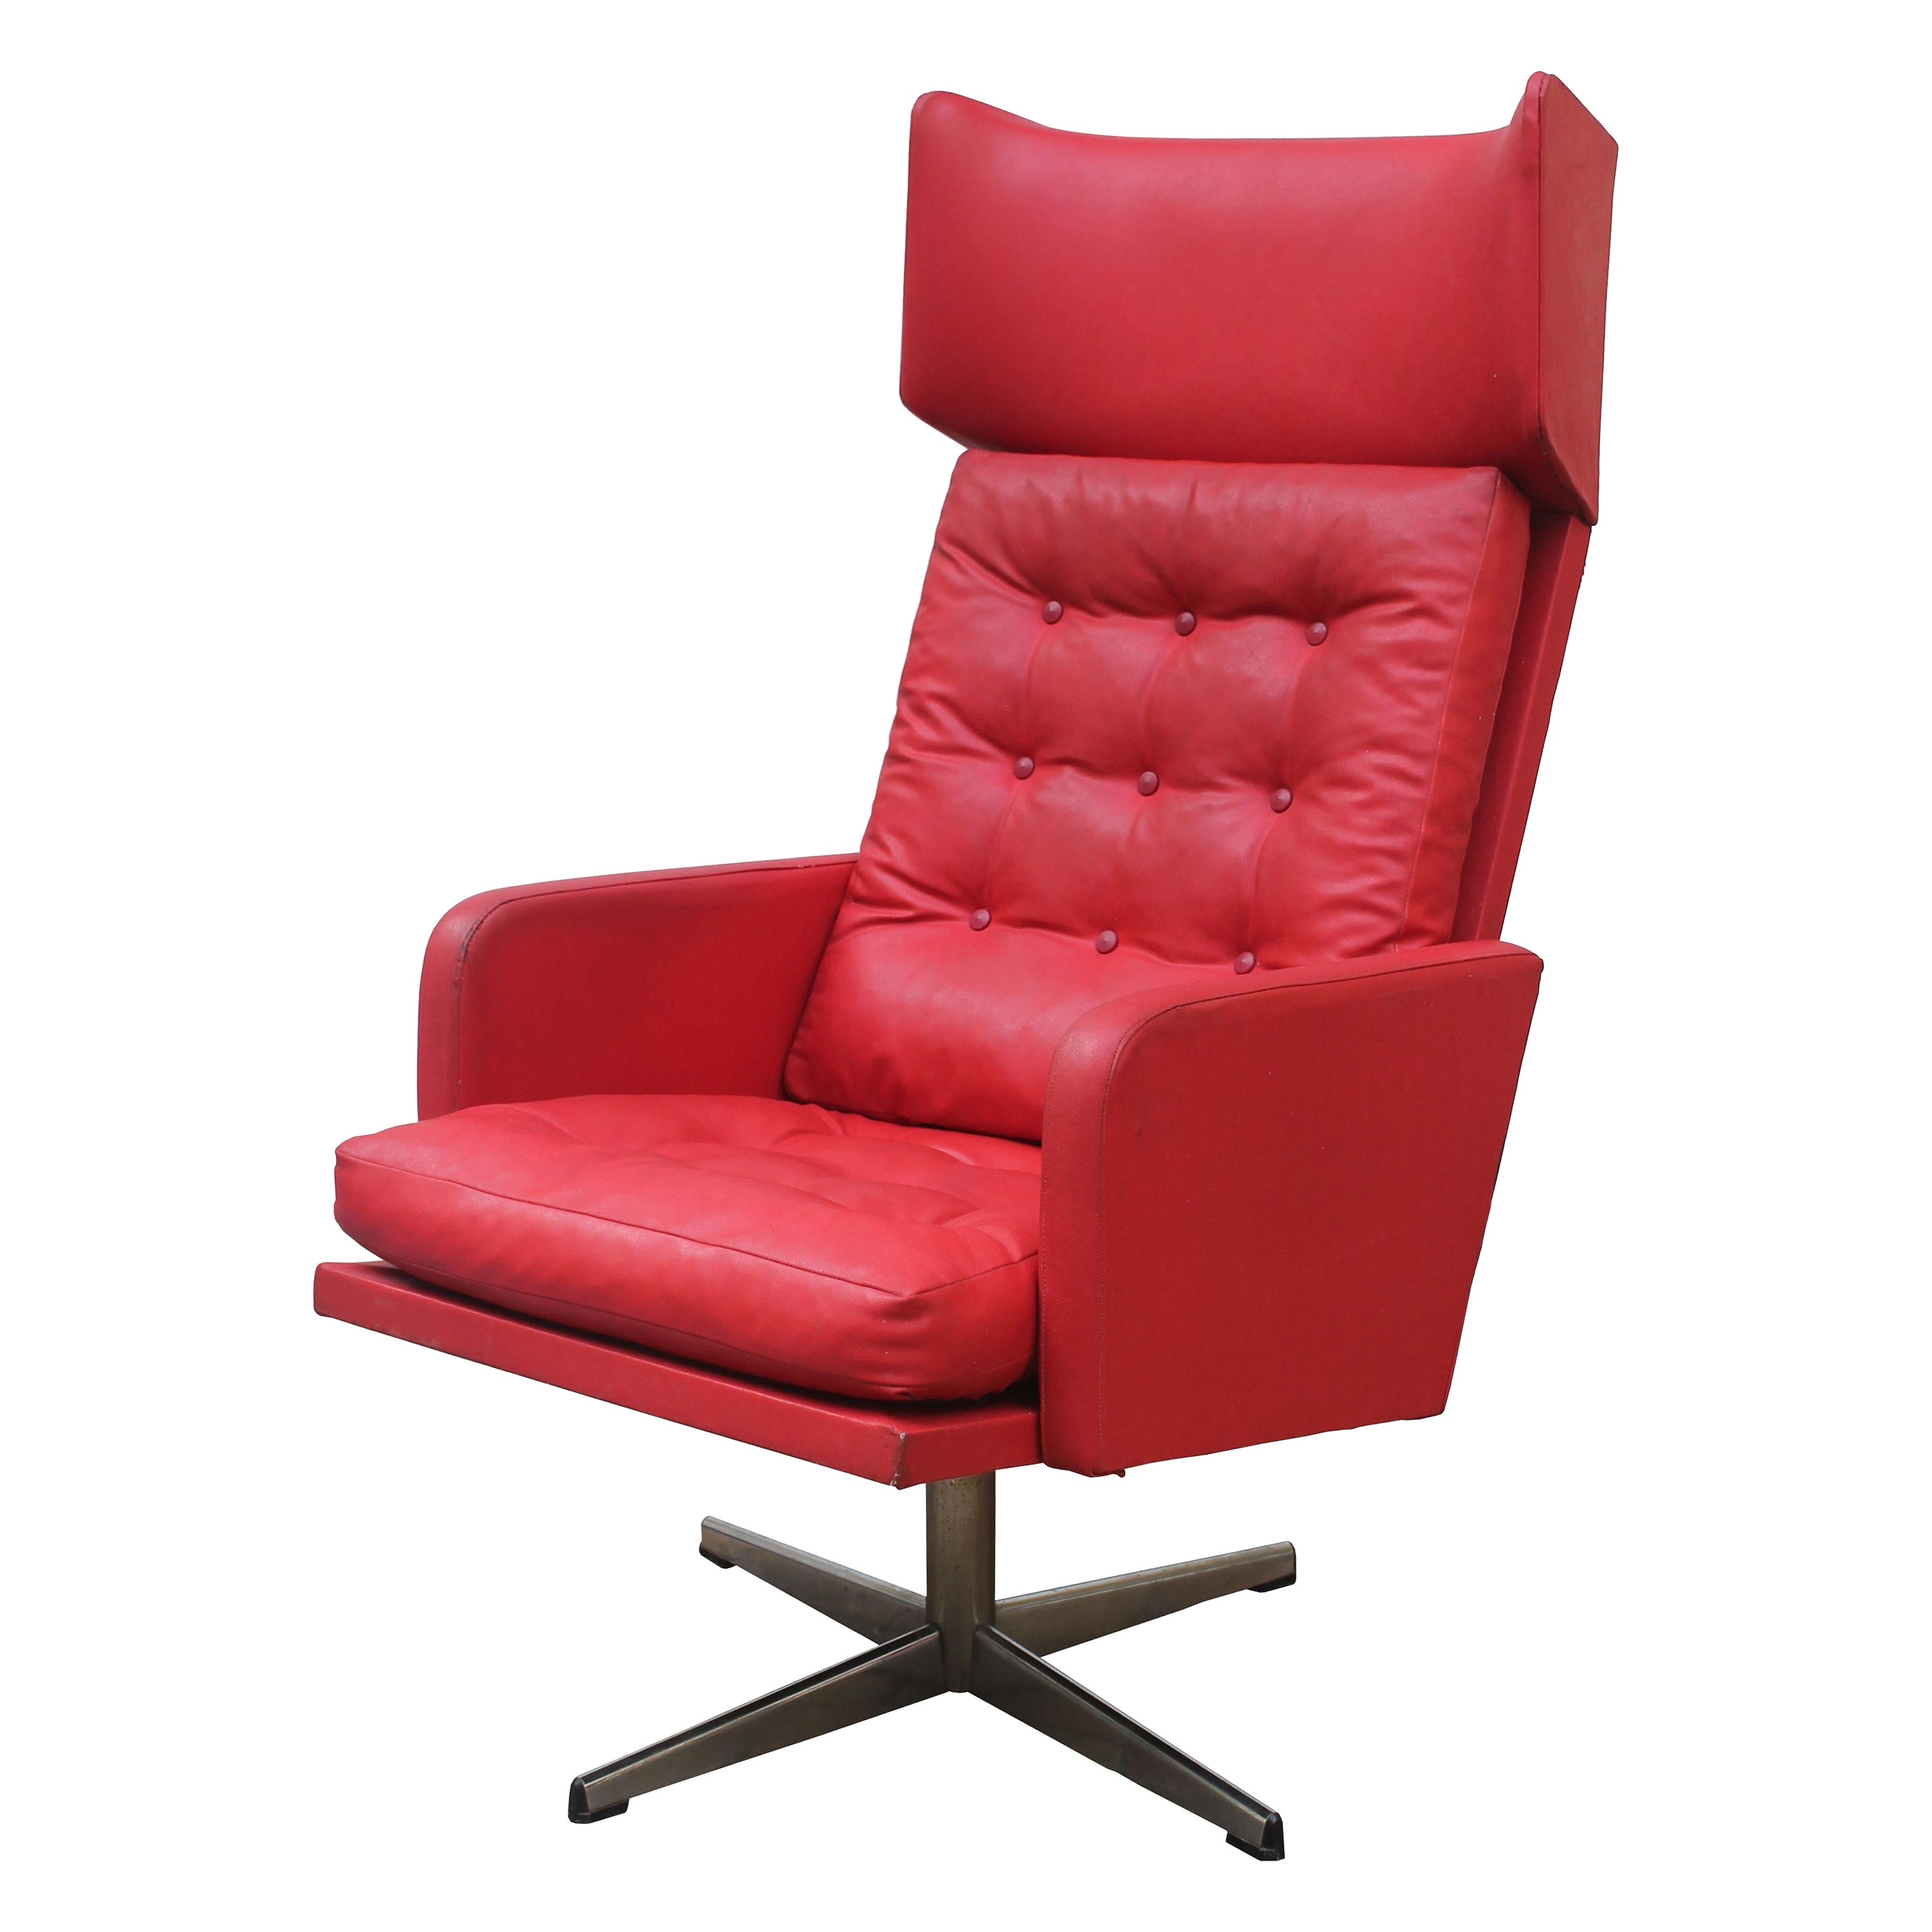 1970s Red Leather Swivel Armchair For Sale